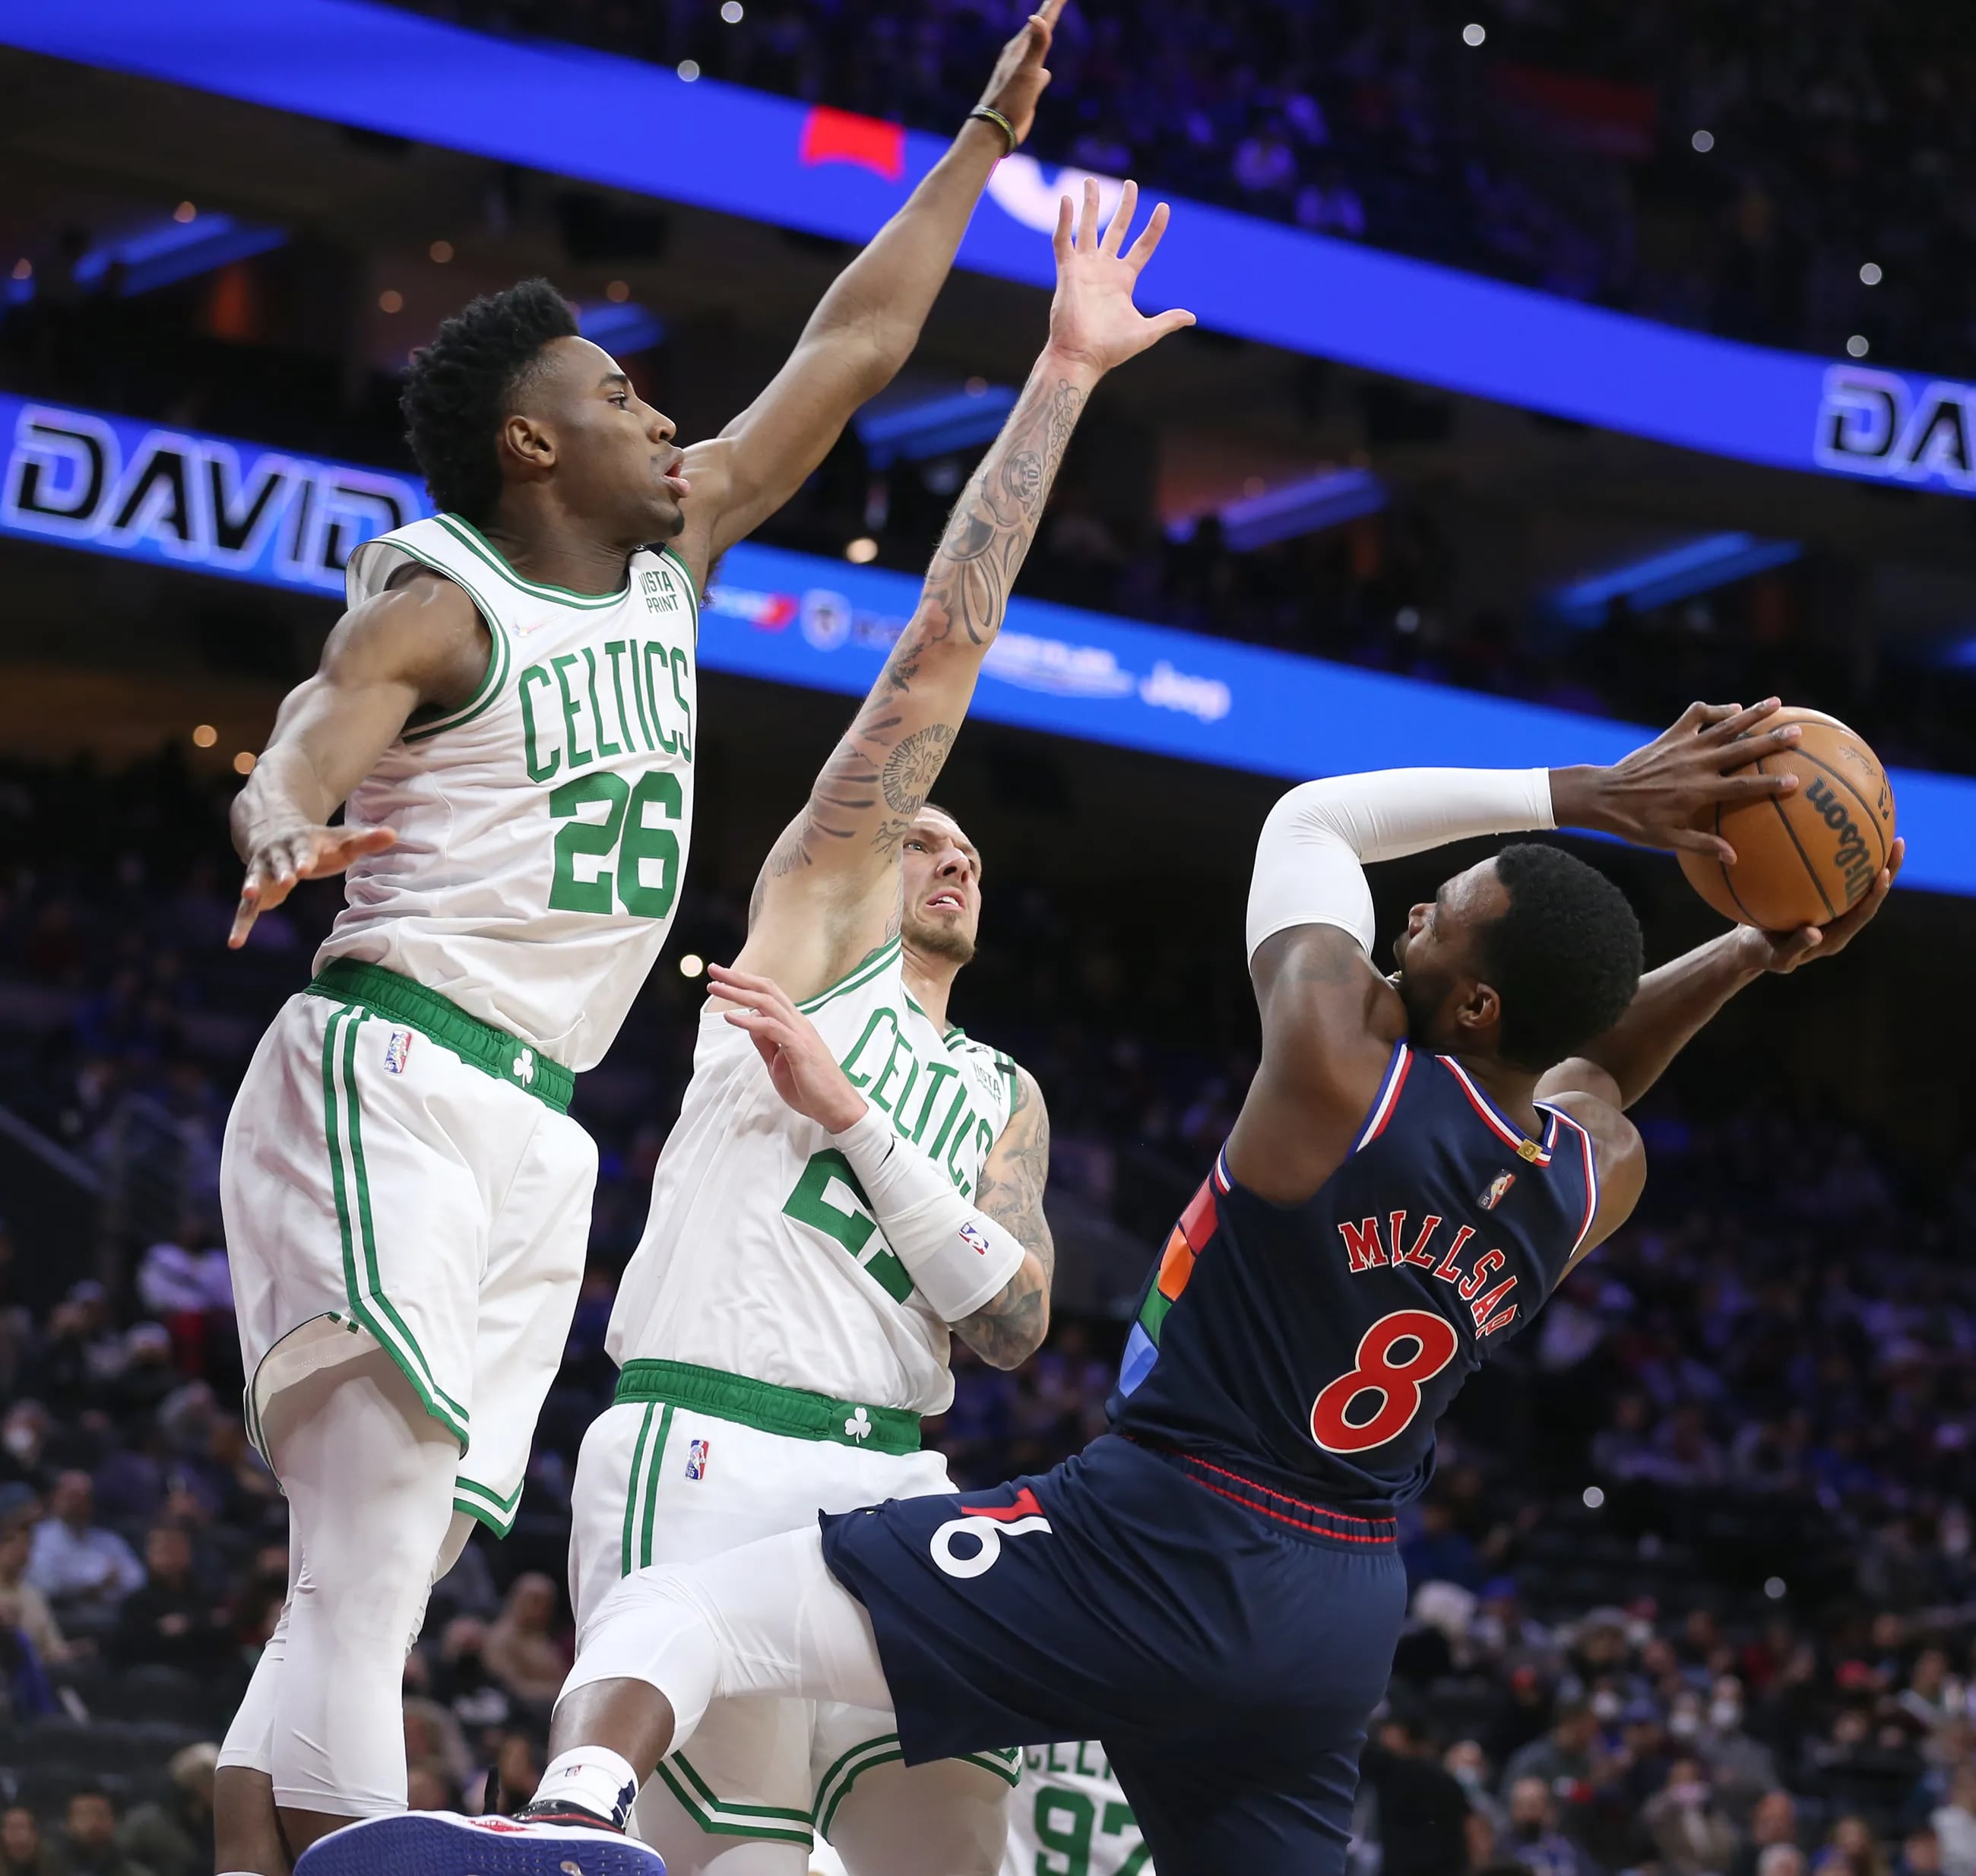 What Happened in the Celtics-Sixers Series Featured in 'Uncut Gems